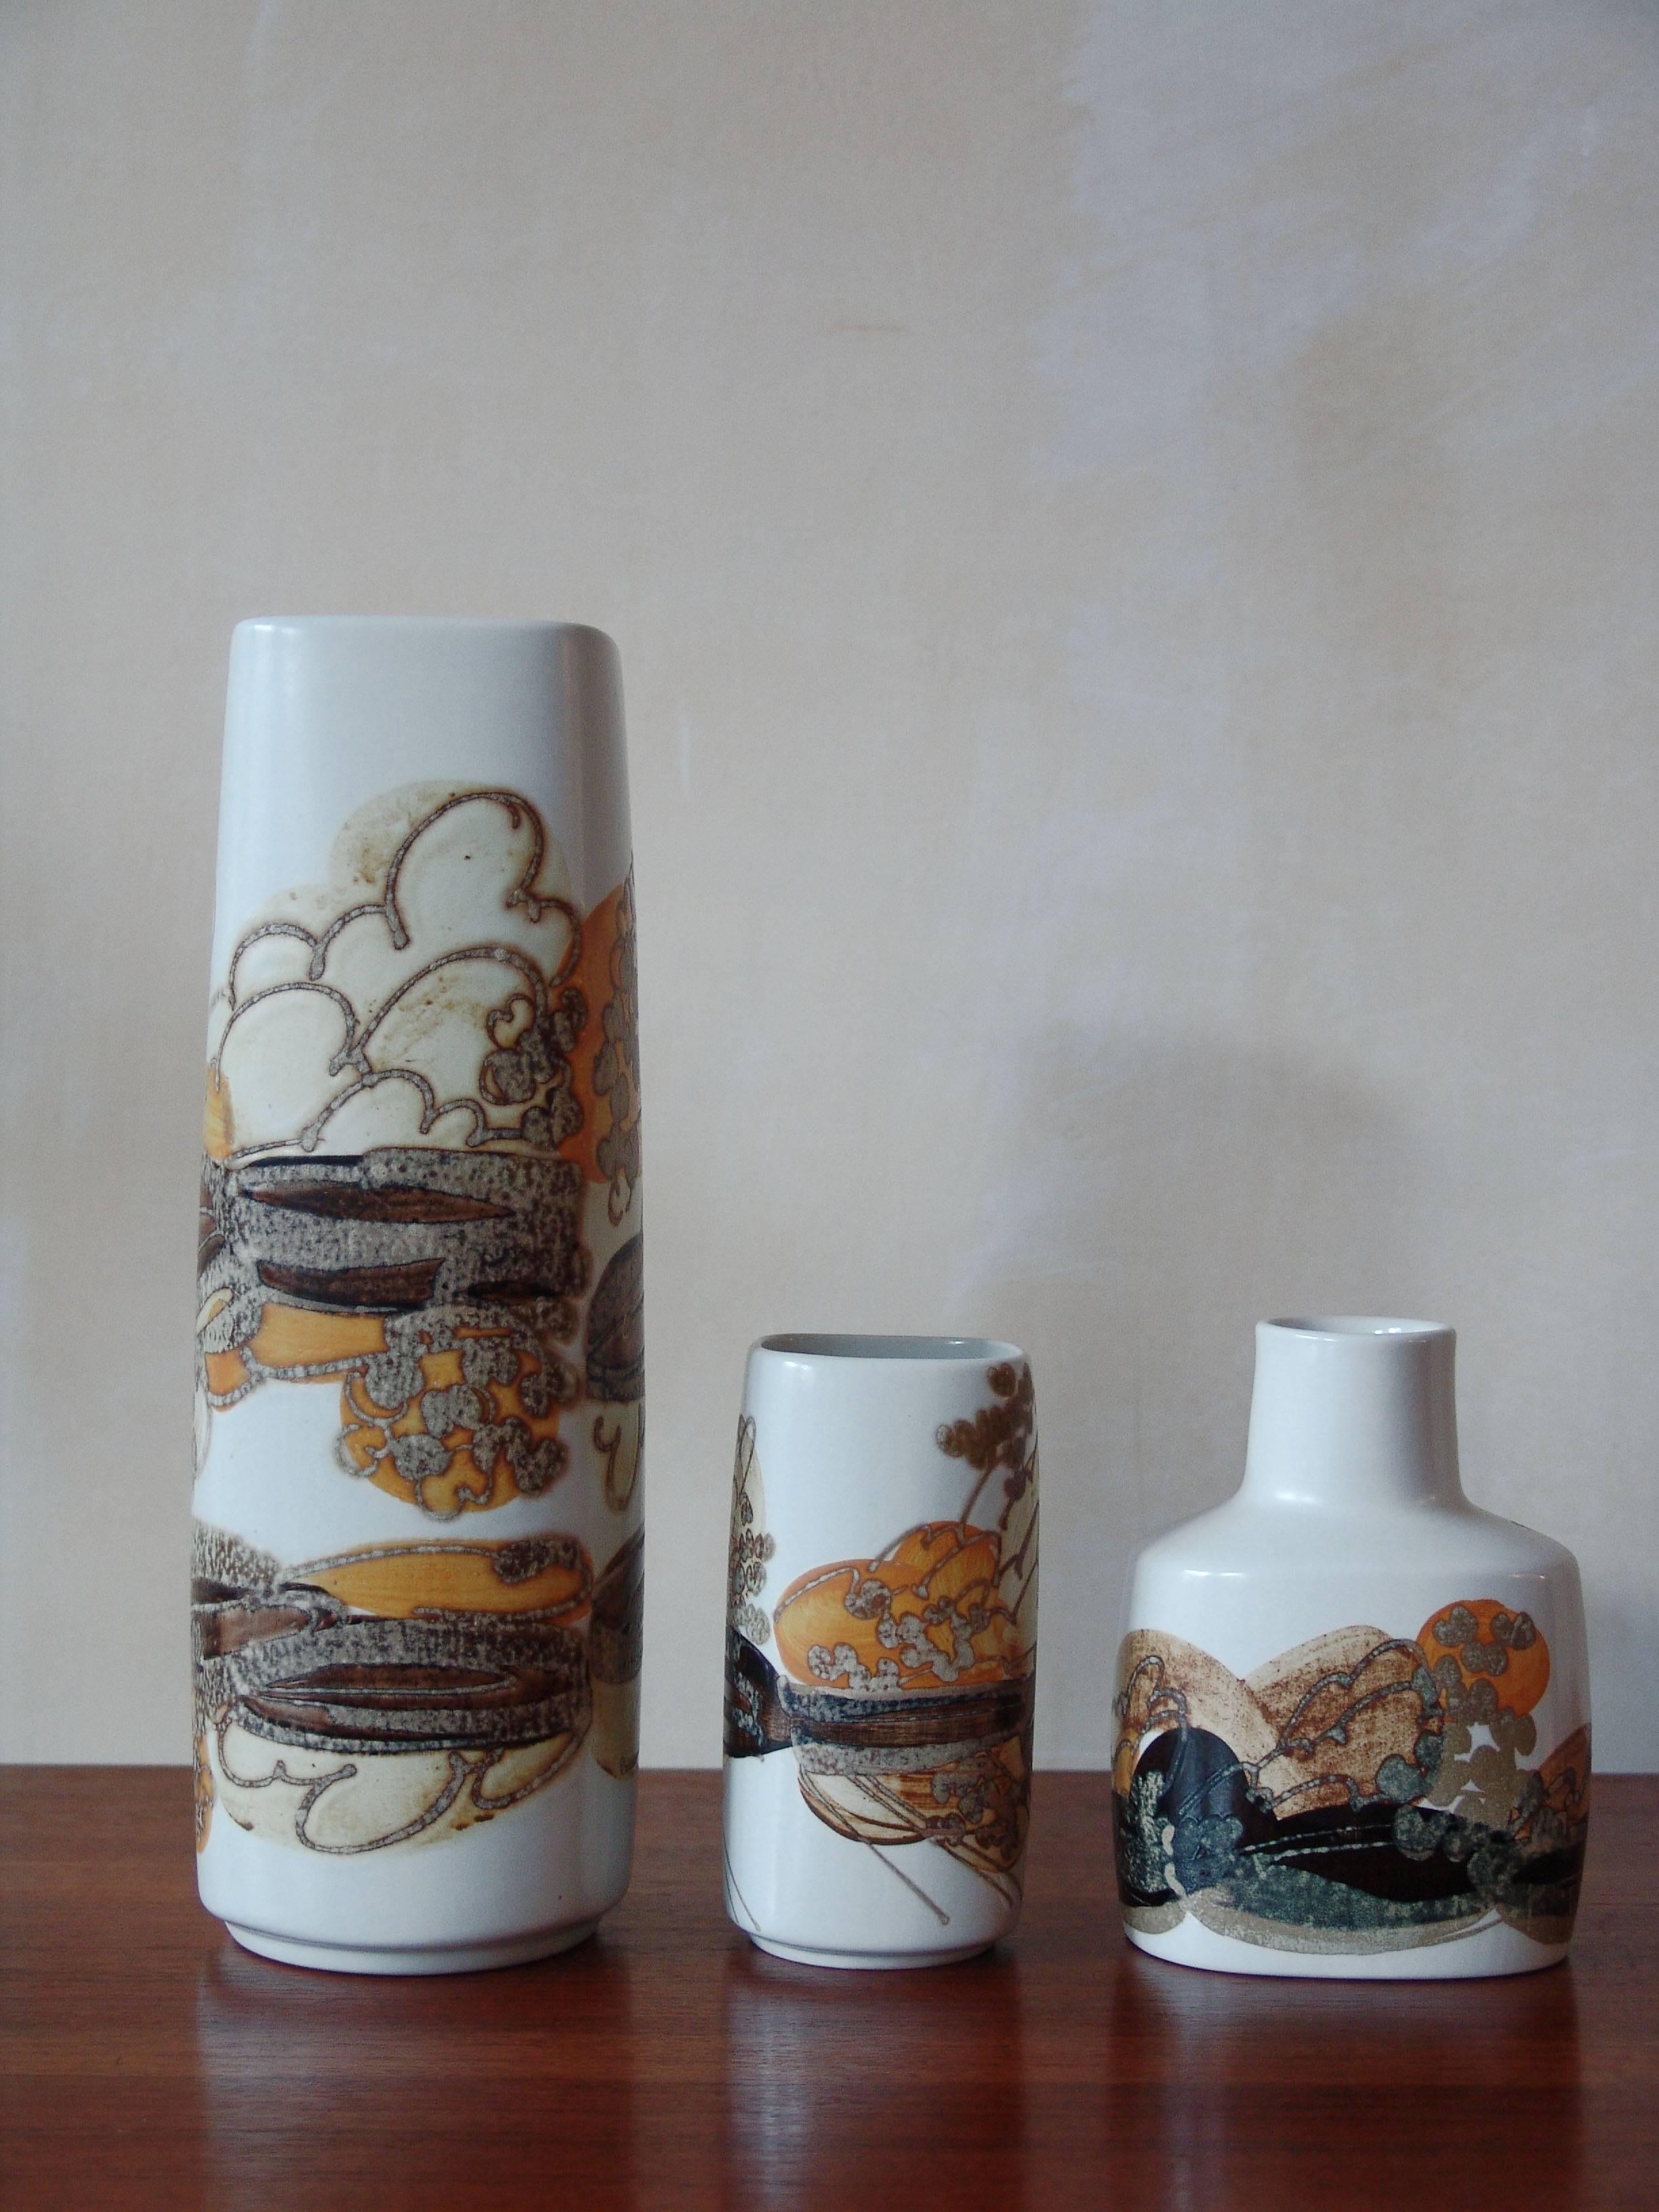 Set of Scandinavian Mid-Century Modern ceramic vases designed by Ivan Weiss for Royal Copenhagen with the manufacturer's signature on the bottom, circa 1960s.
Dimensions from left (picture number 1) height 27 cm, height 12.5 cm, height 13 cm.